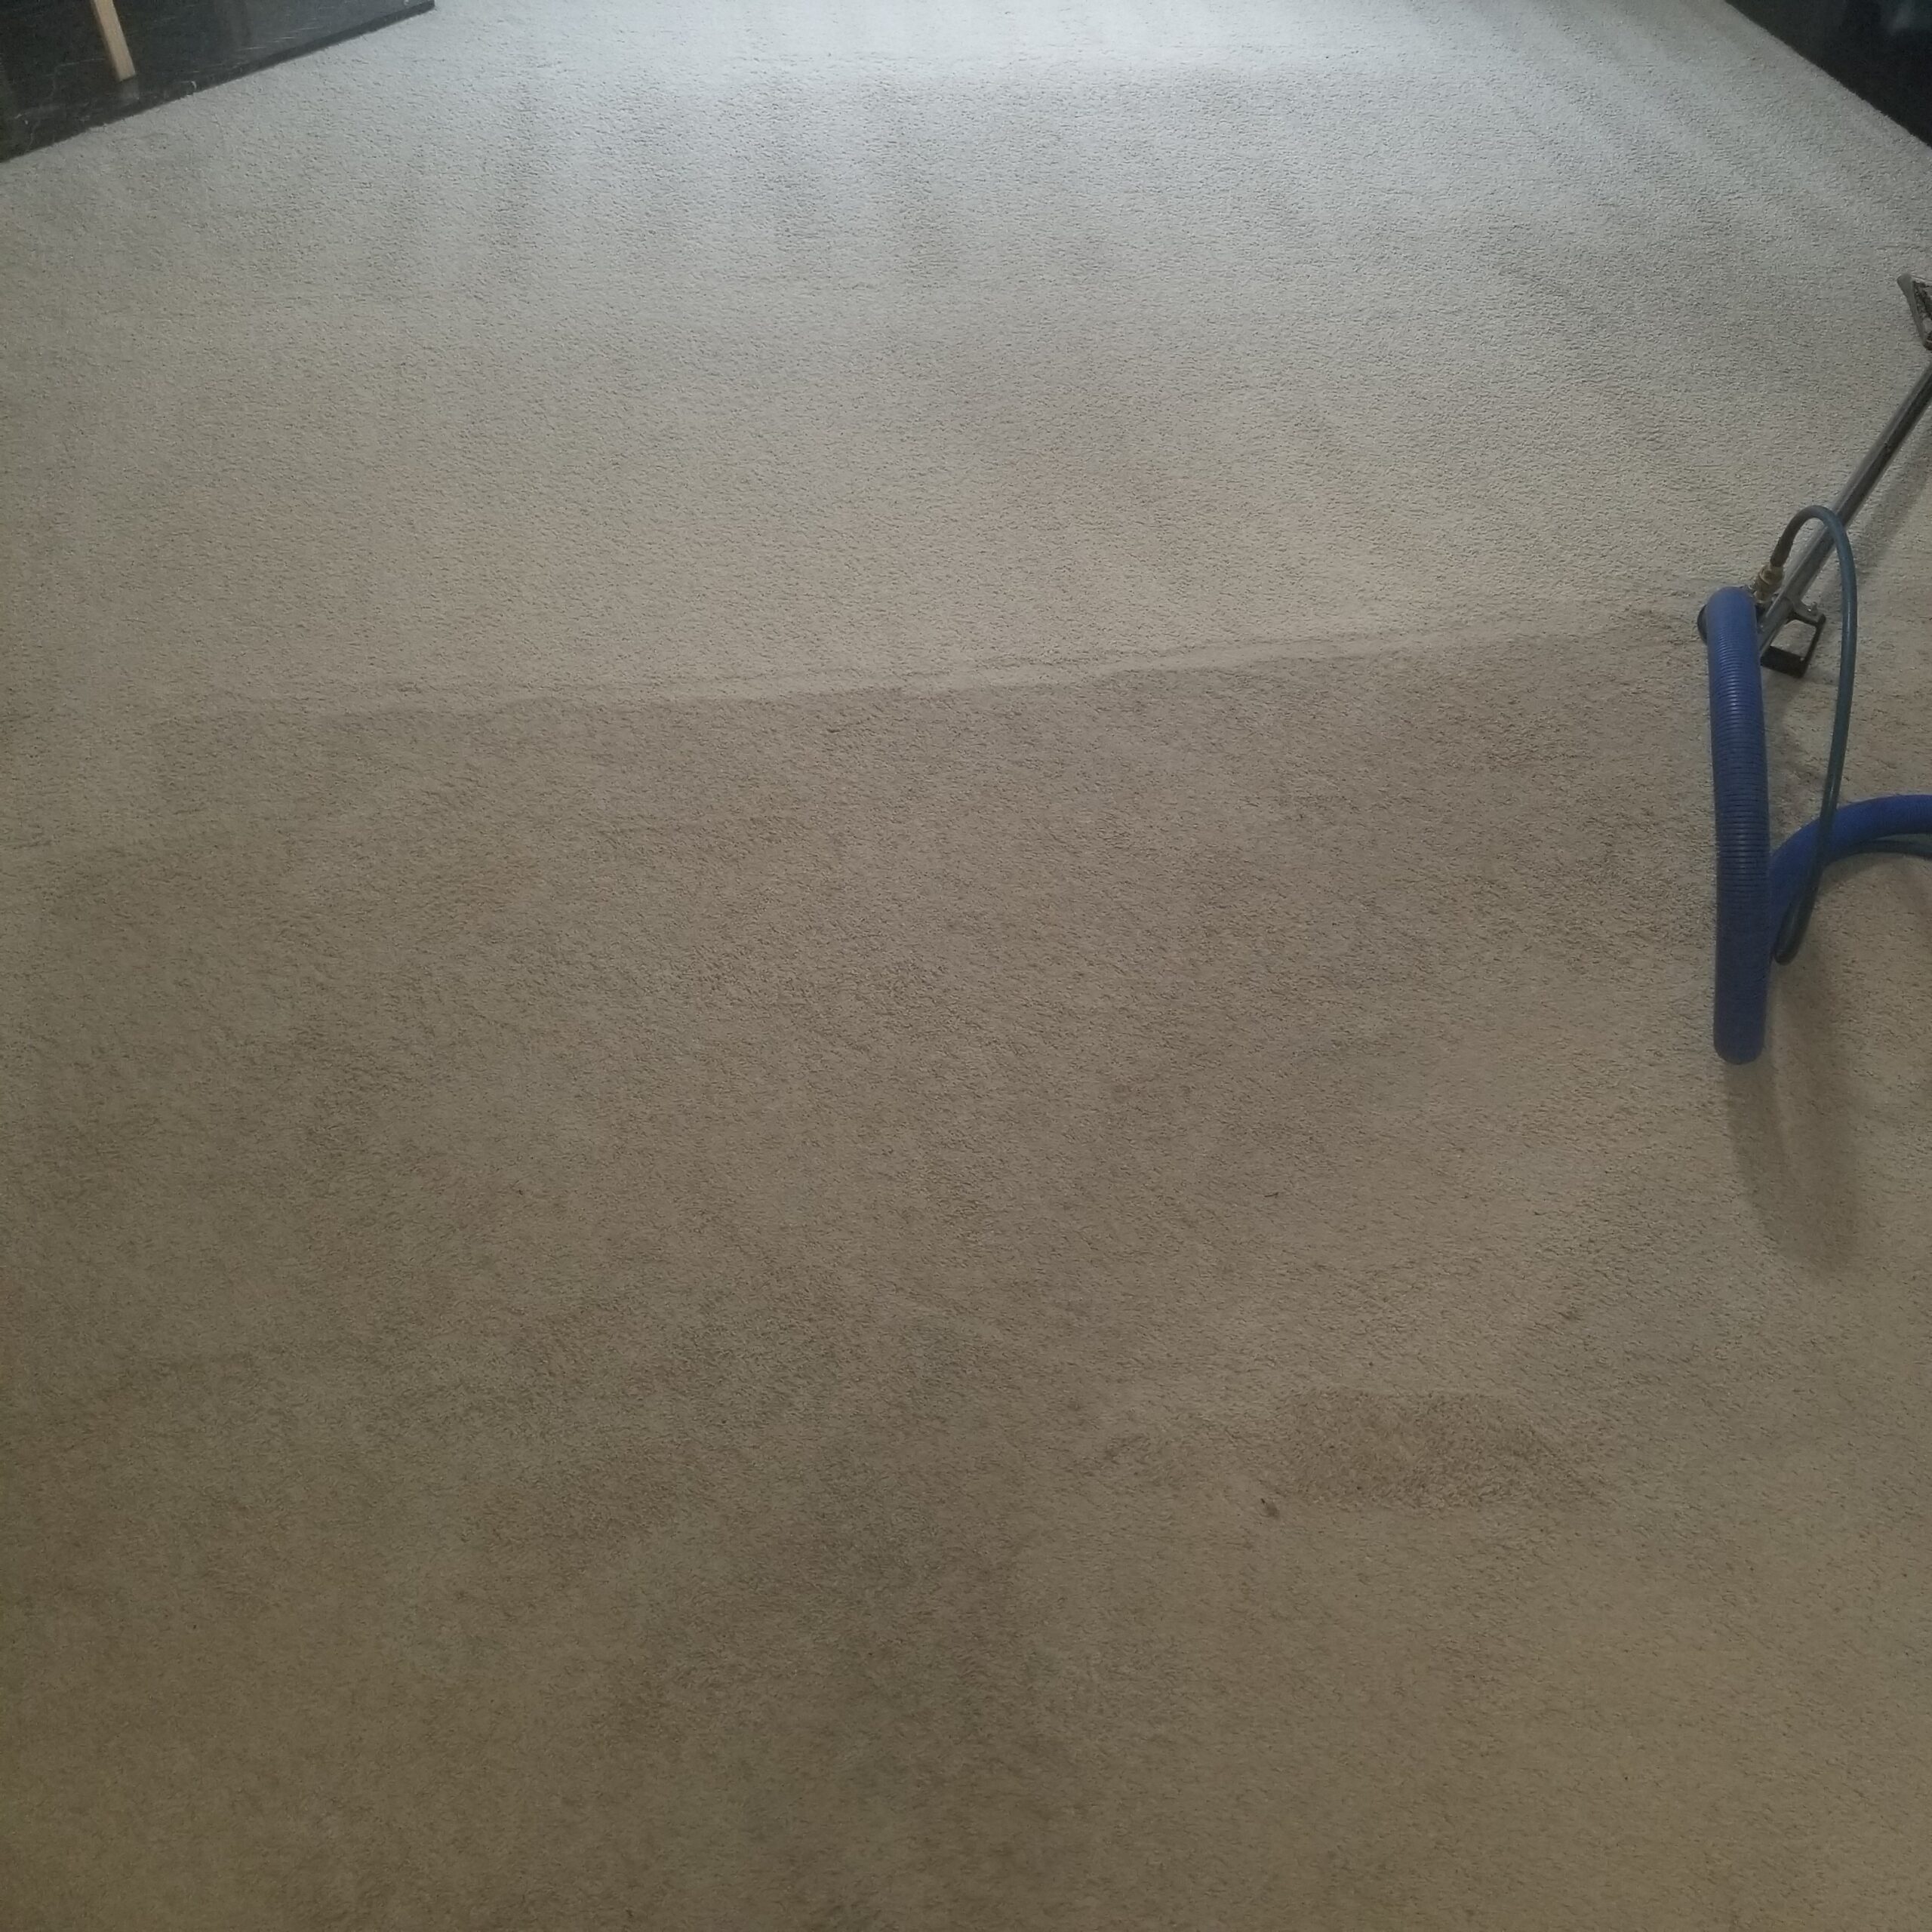 Carpets Cleaned Professionally